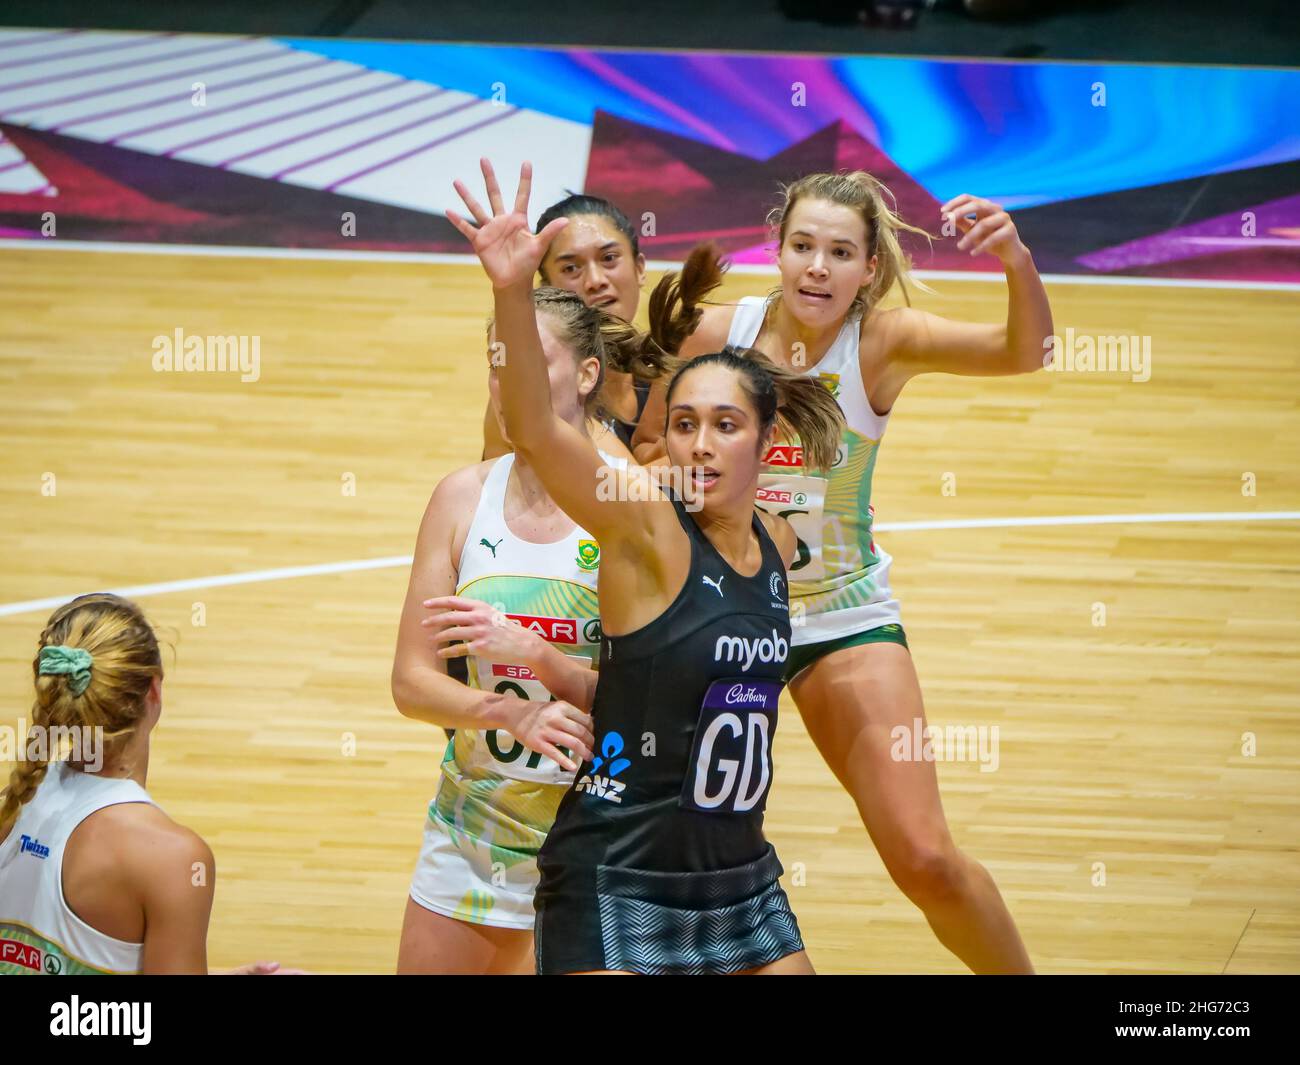 London, UK. 18th Jan, 2022. Copper Box Arena, London, 18th January 2022 Jostling for space in the scoring circle in the match between Proteas (South Africa) and Silver Ferns (New Zealand) in the Quad Series at the Copper Box Arena, London on 18th January 2022 Claire Jeffrey/SPP Credit: SPP Sport Press Photo. /Alamy Live News Stock Photo